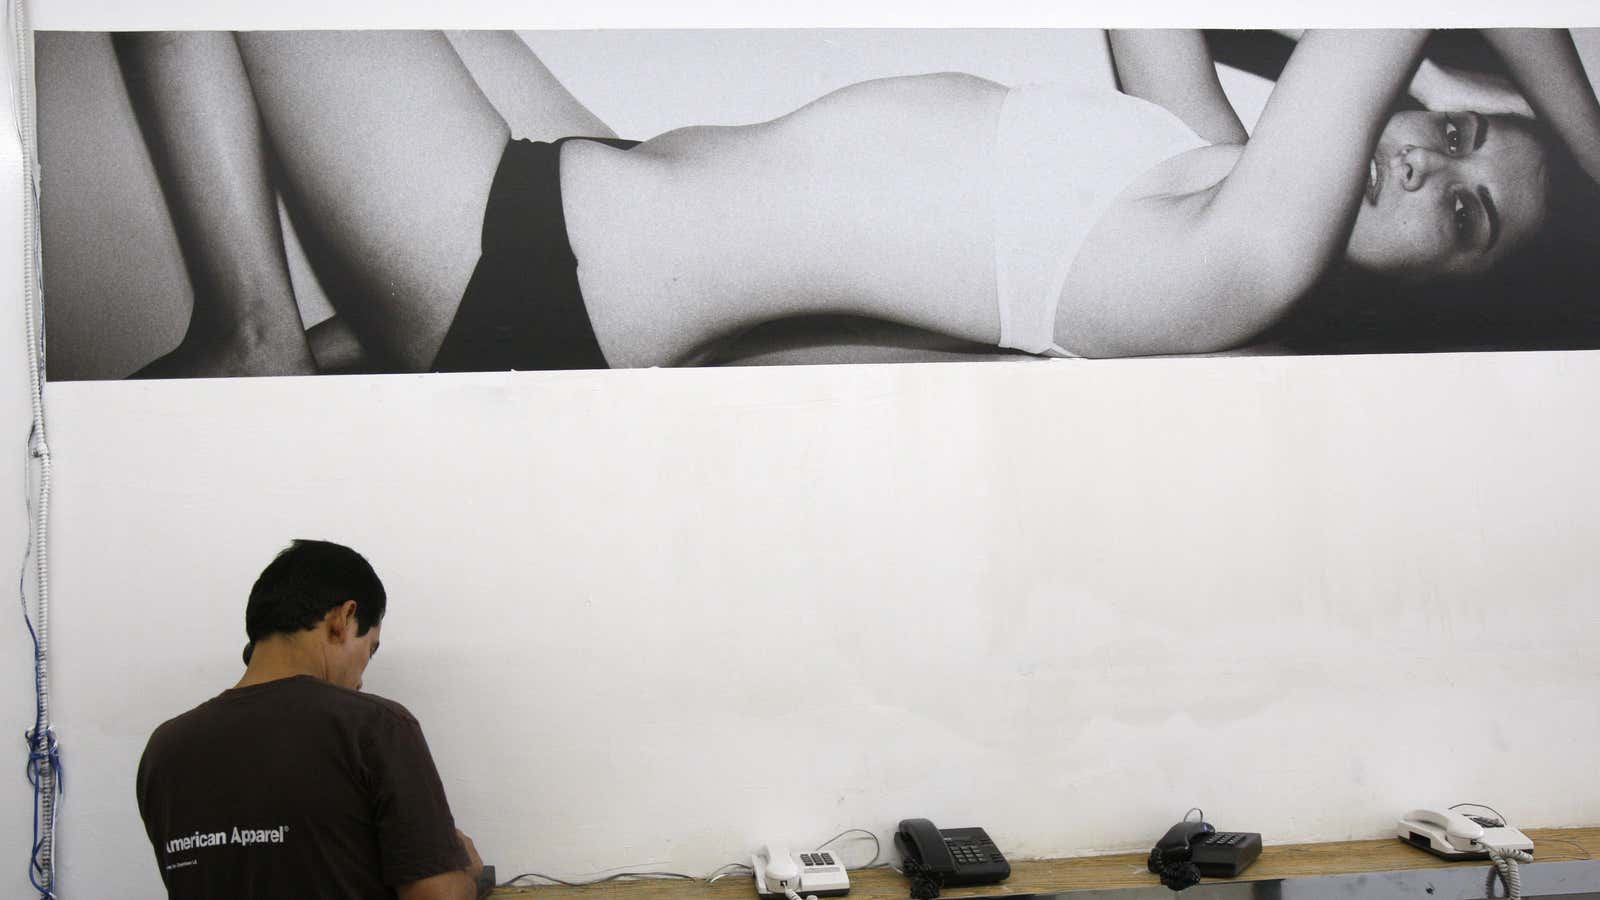 Sex is an inescapable part of American Apparel, even in its Los Angeles factory.